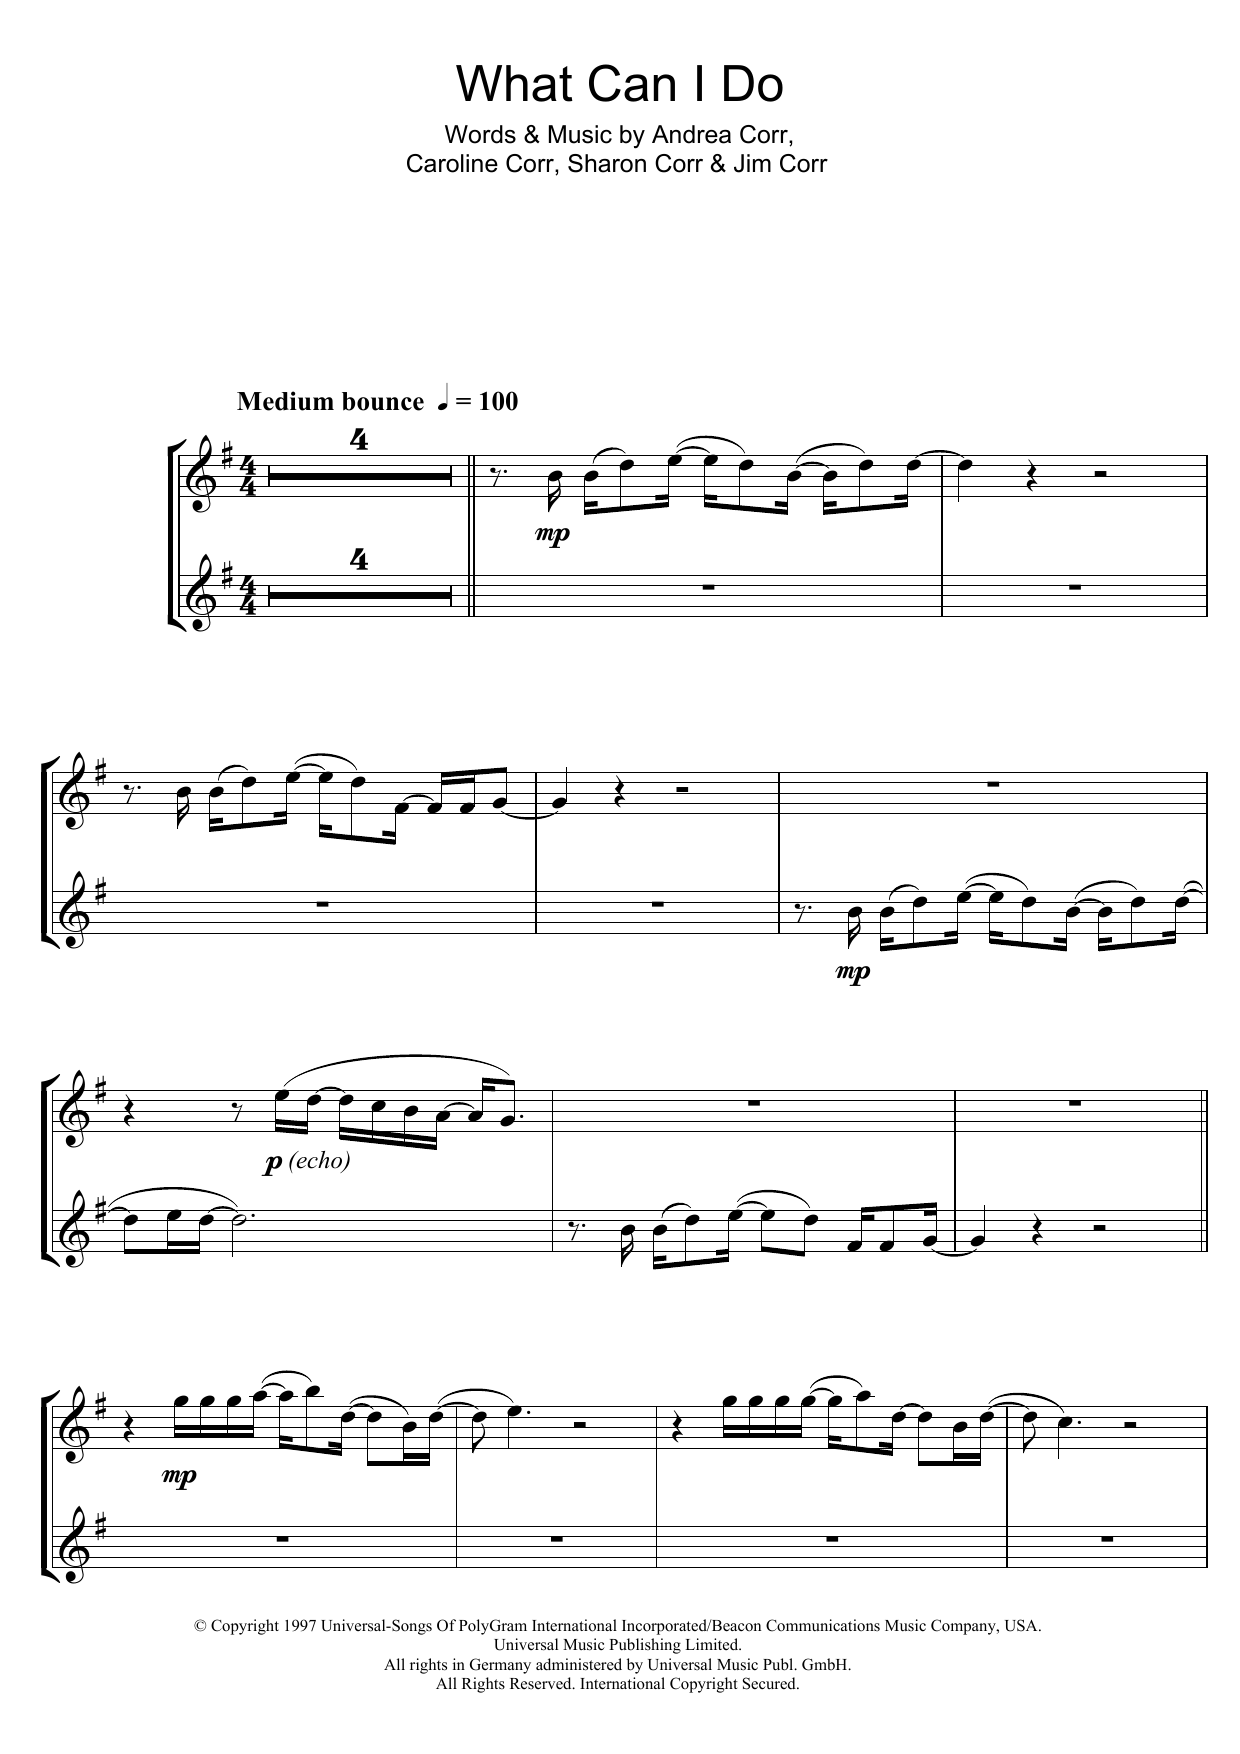 Download The Corrs What Can I Do Sheet Music